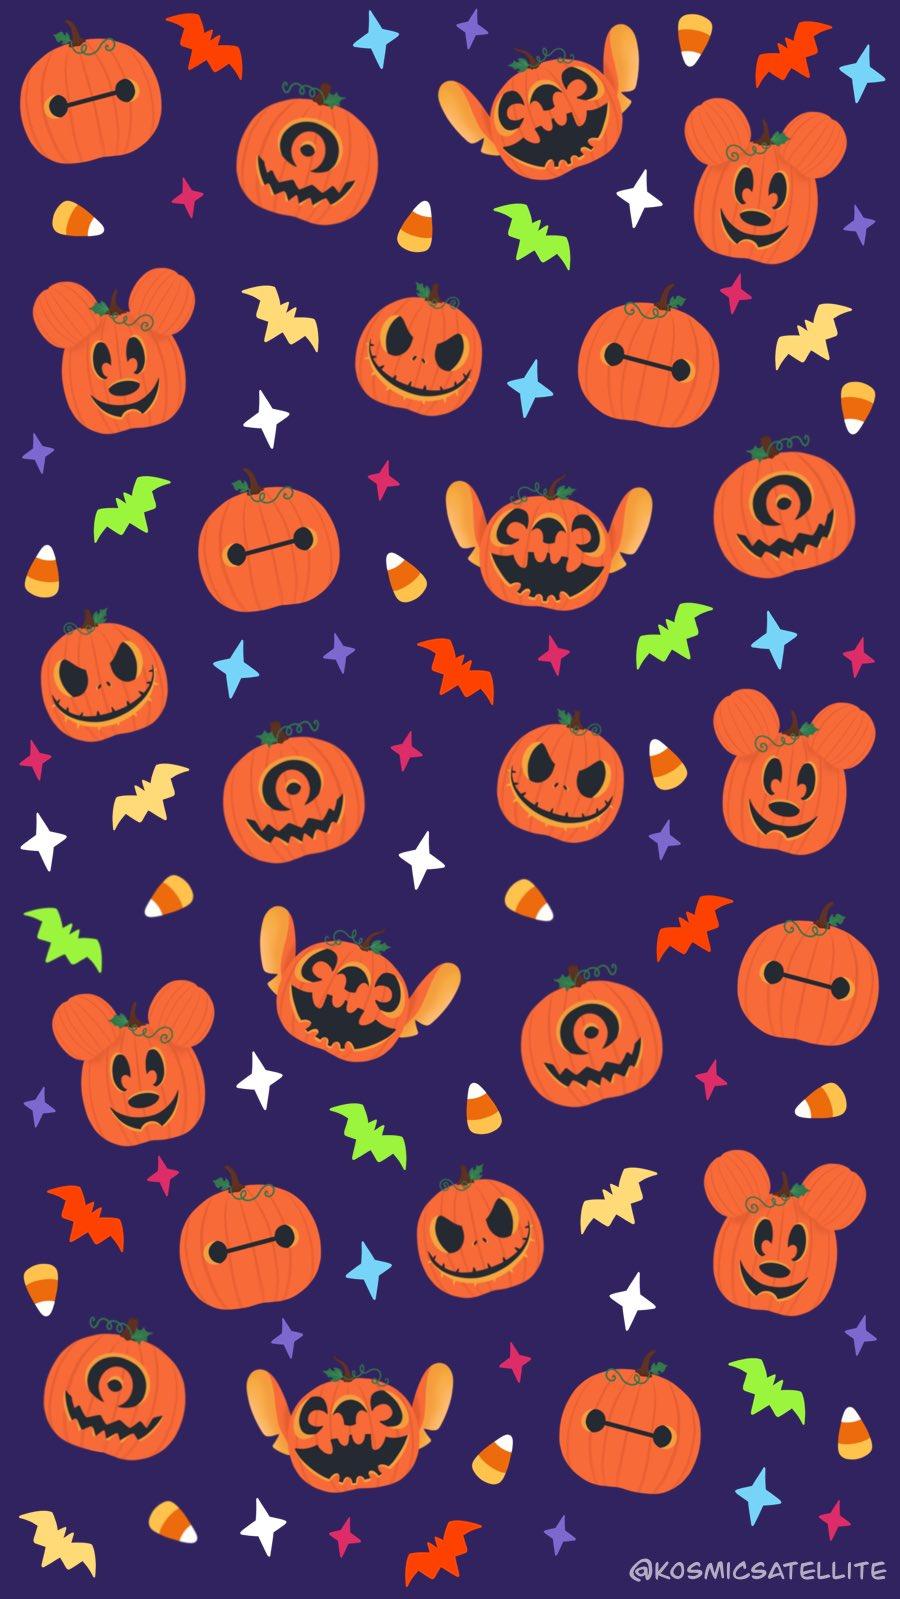 Ks On X Made This Spooky Wallpaper For Halloween